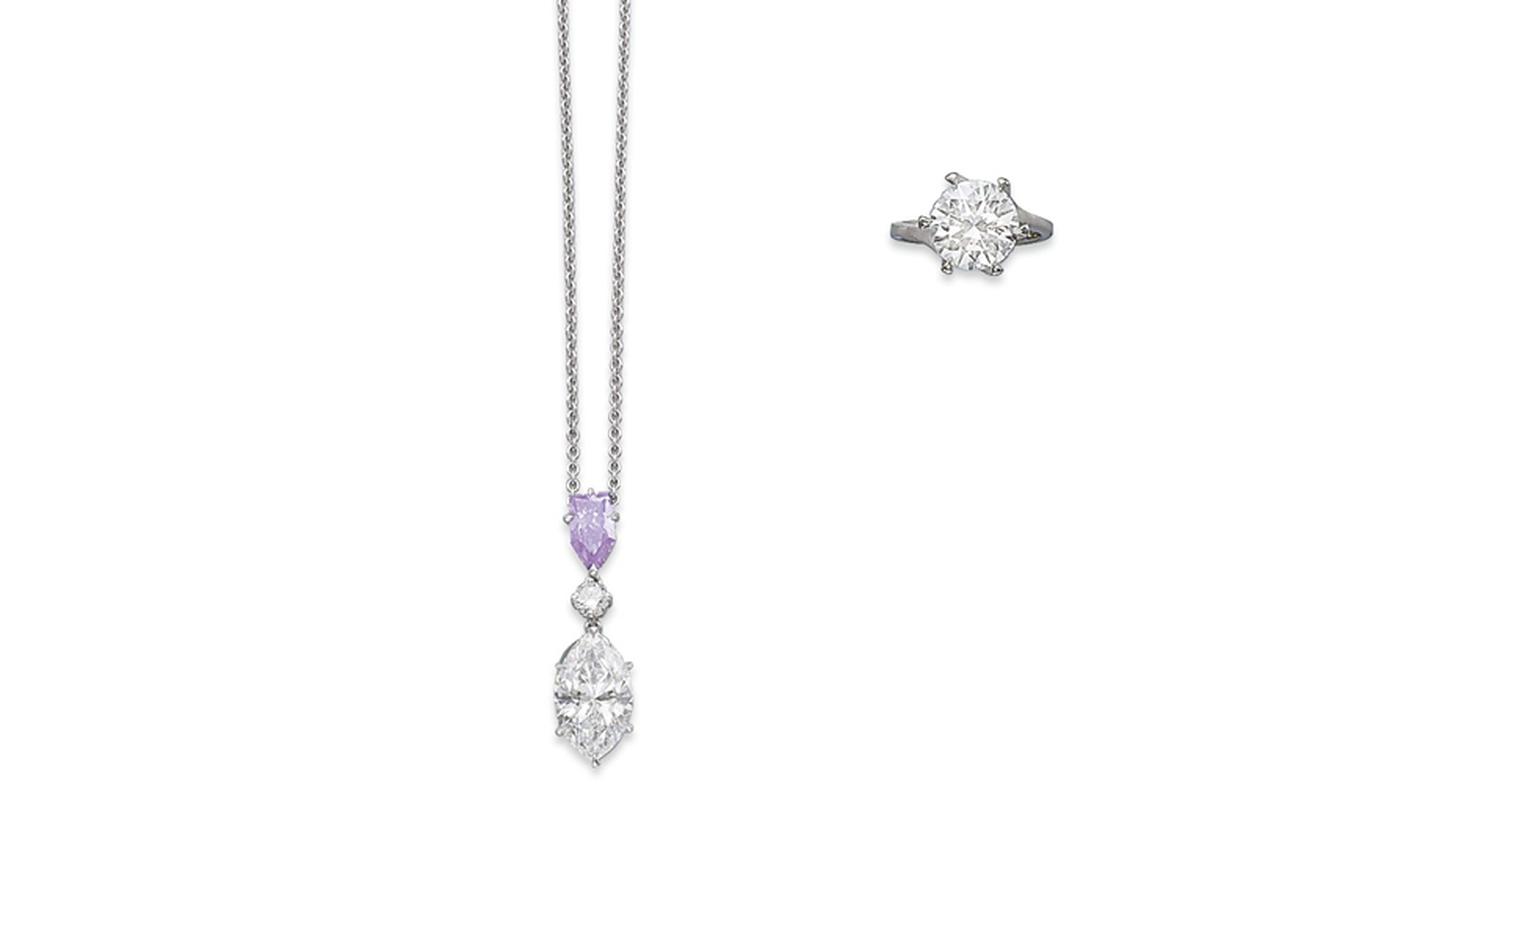 Lot 291. A coloured diamond pendant. The pendant set with a bullet-shaped fancy purple diamond, weighing 1.04 carat, suspending a brilliant-cut diamond and a marquise-cut diamond necklace. Estimate CHF 180,000 - CHF 220,000 SOLD FOR CHF 231,000